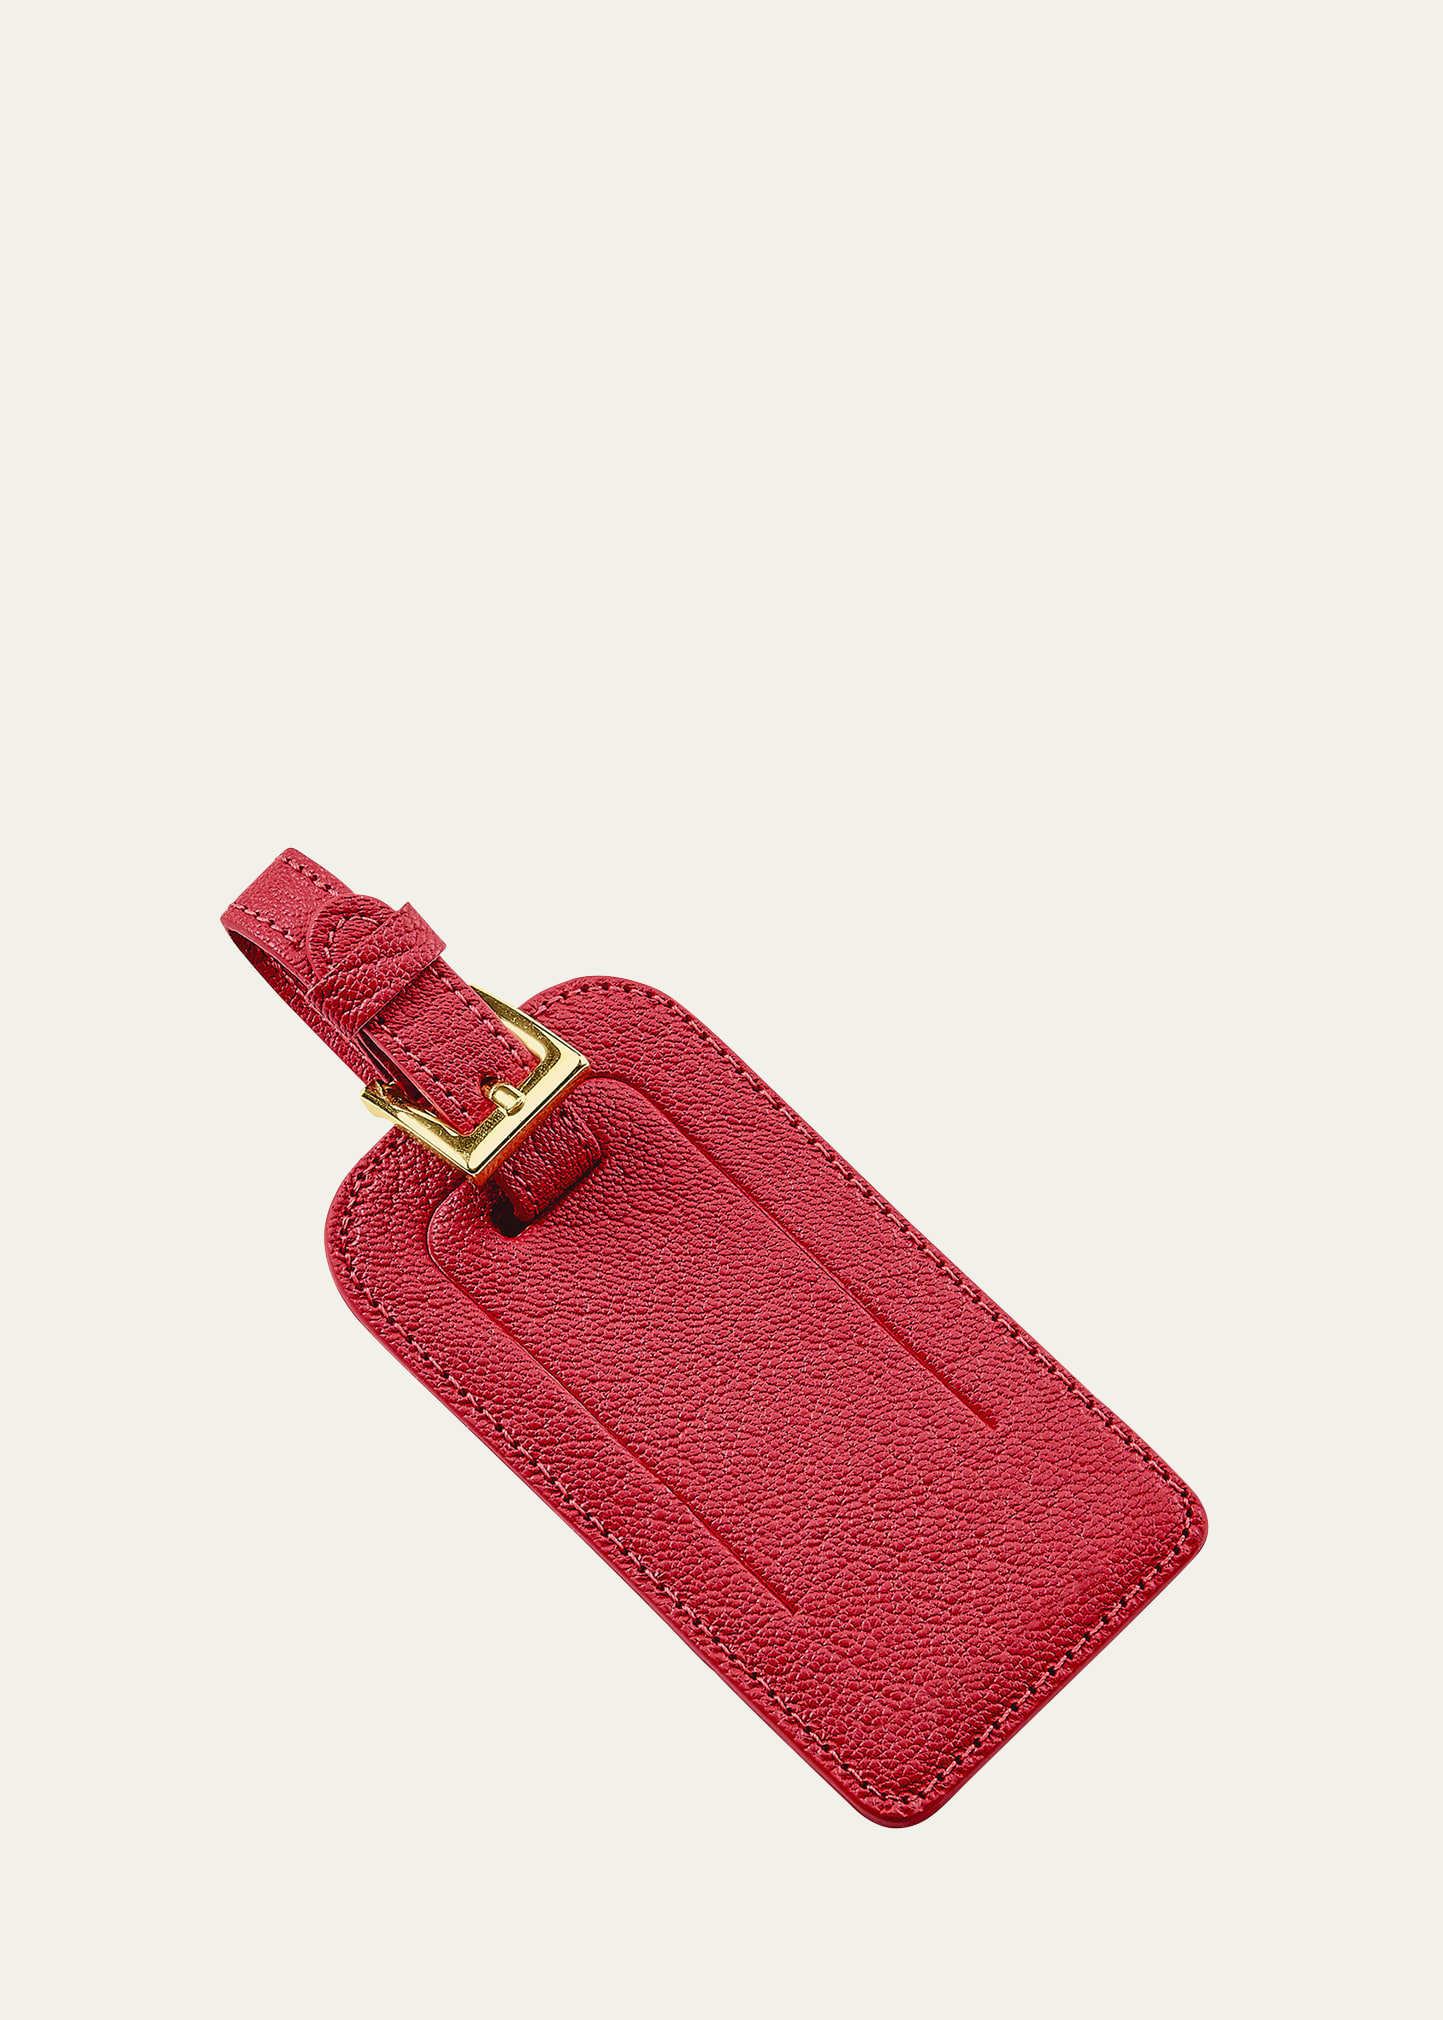 Bergdorf Goodman Leather Luggage Tag In Red